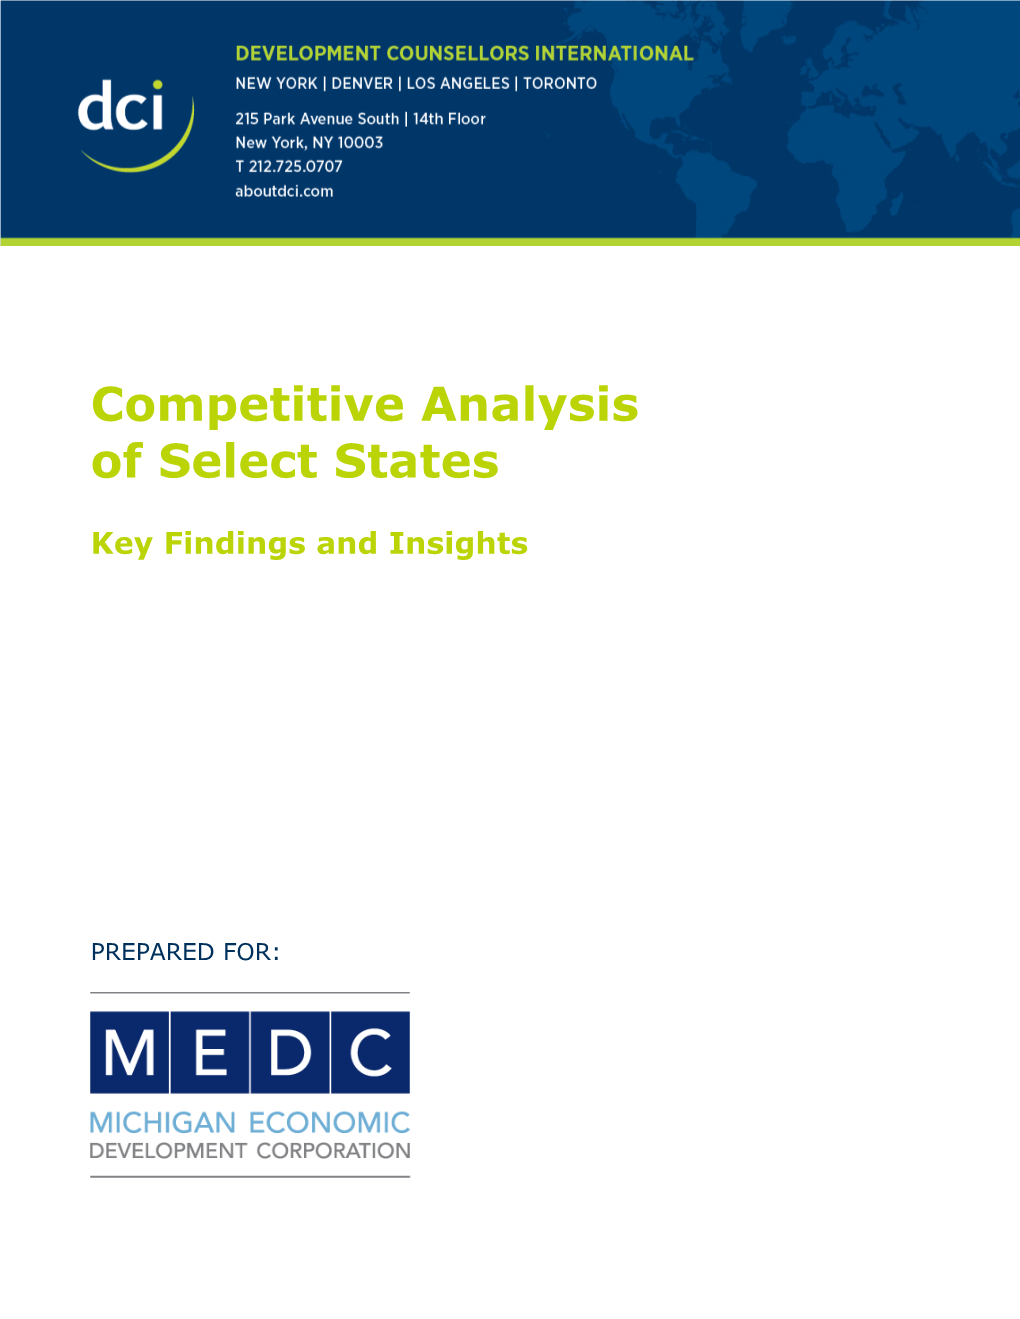 Competitive Analysis of Select States